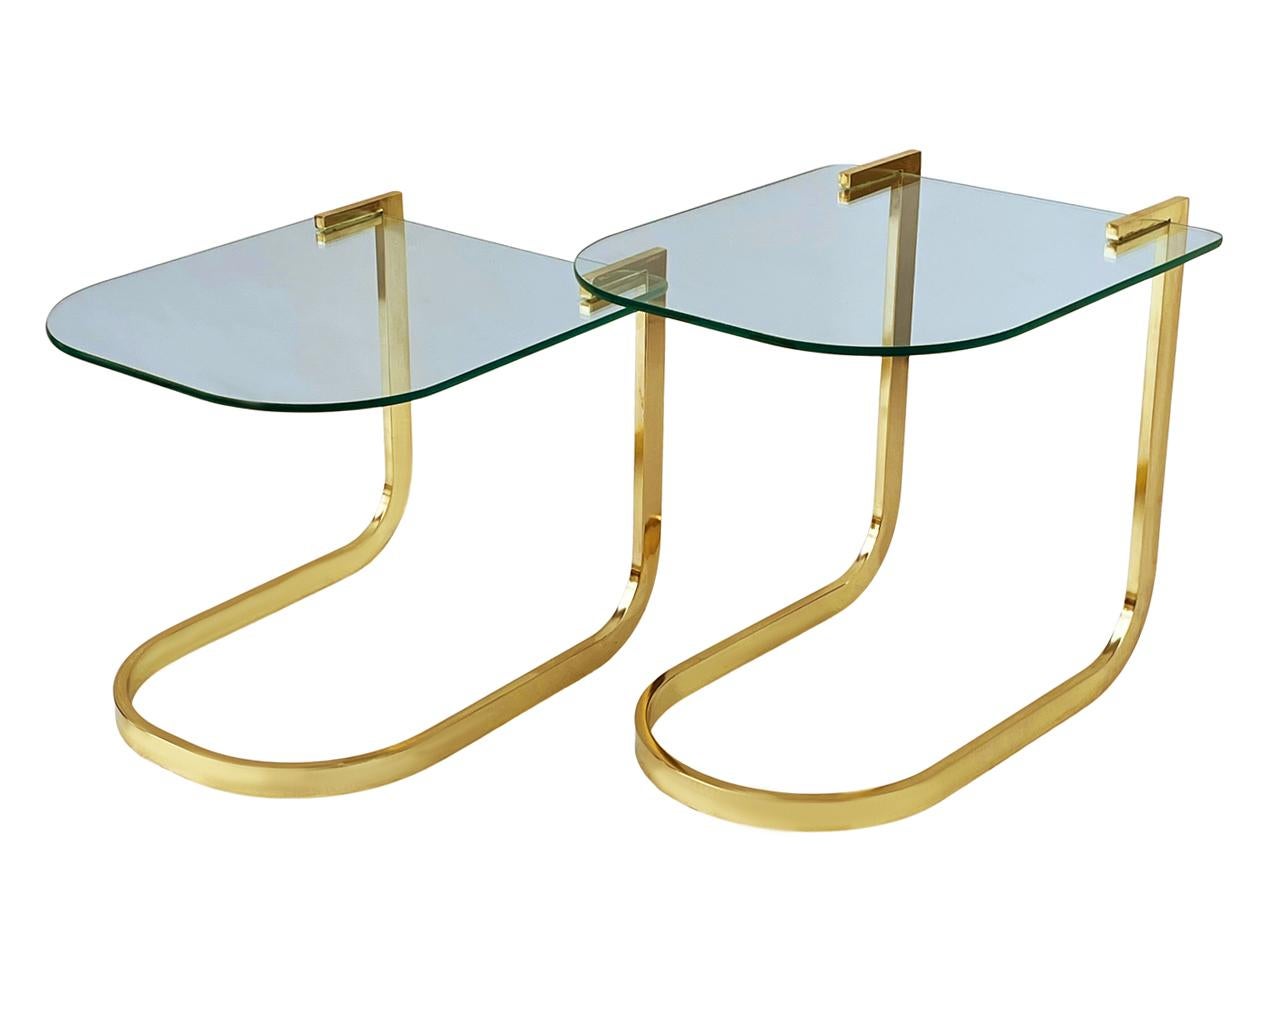 Midcentury Hollywood Regency Brass & Glass Nesting Tables or End Tables In Good Condition For Sale In Philadelphia, PA